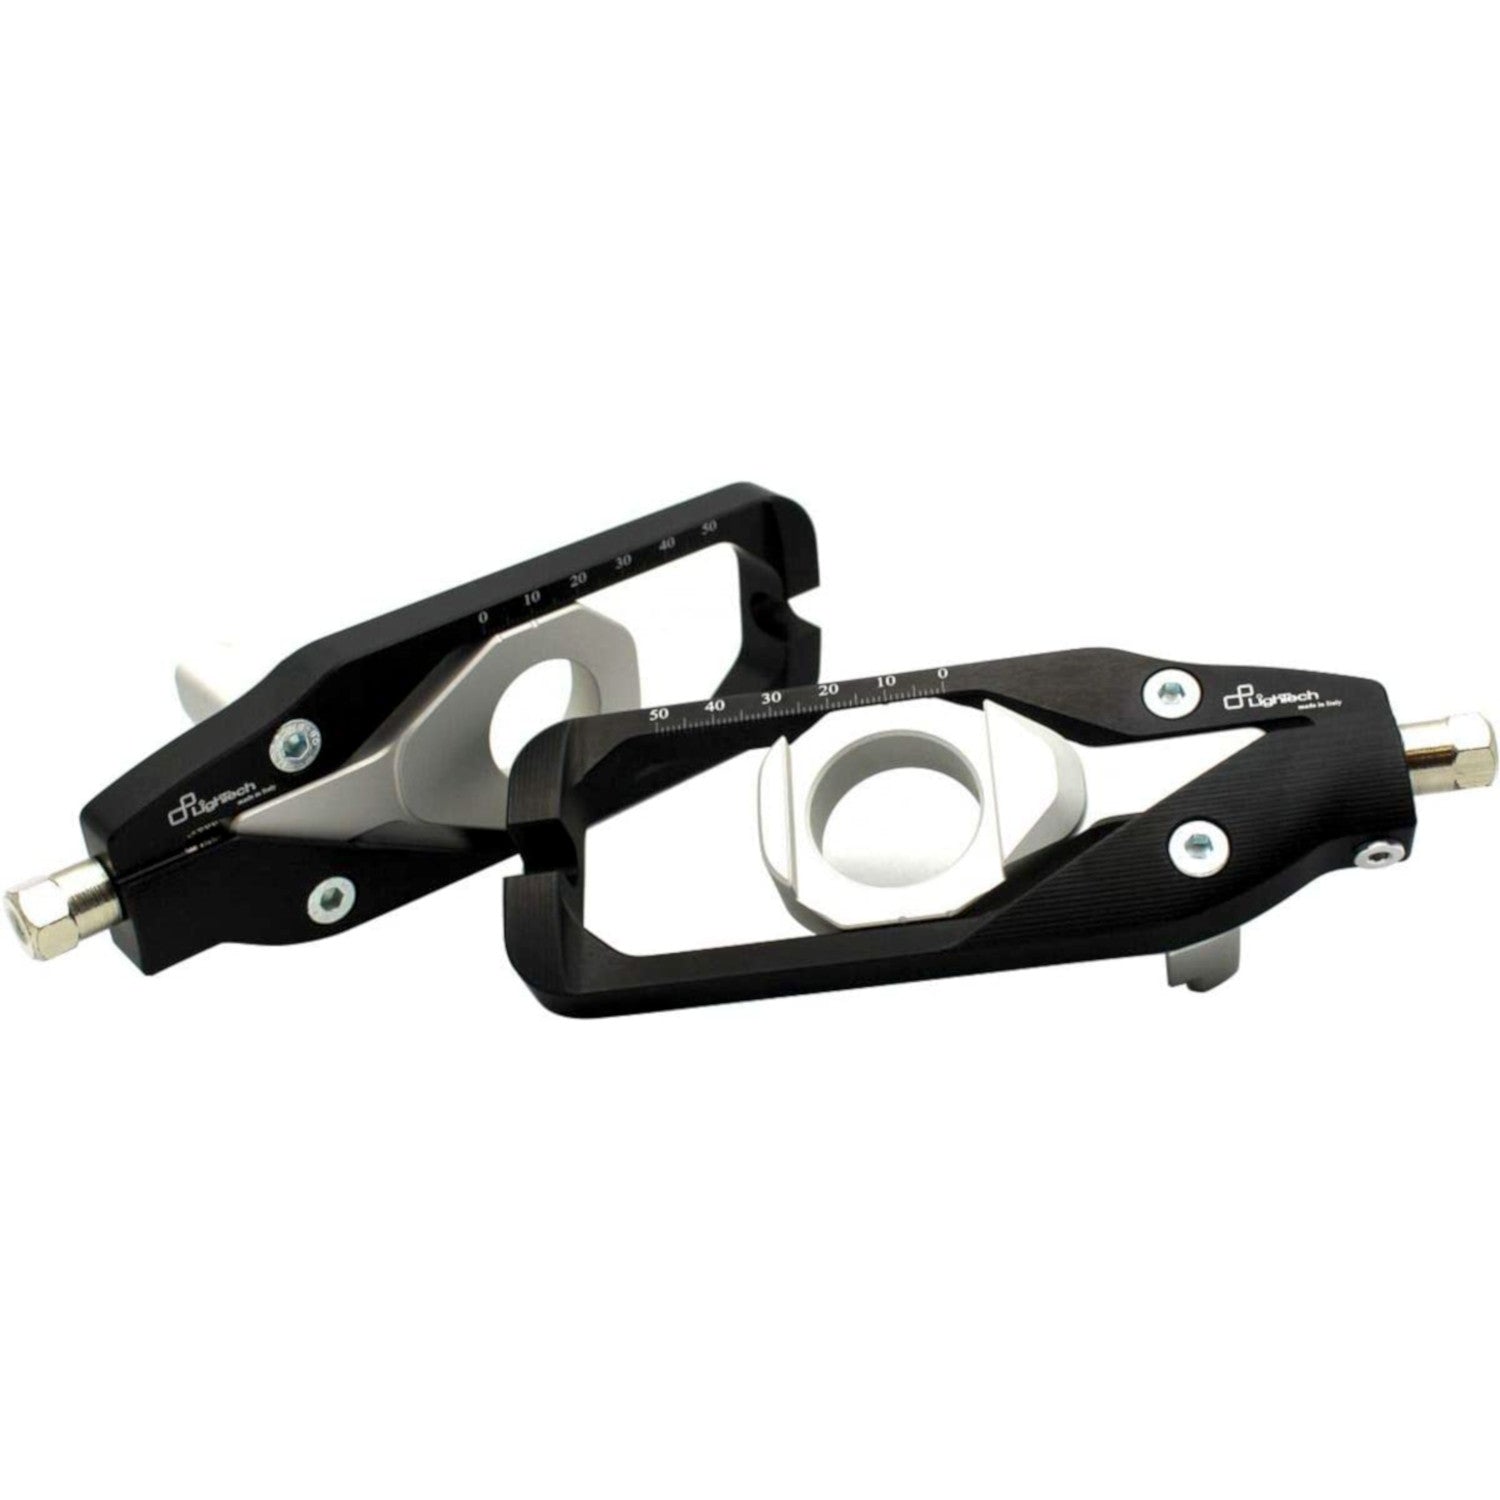 Lightech 2011 - 2015 Kawasaki ZX-10R Tensioner Chain Adjusters (3 Colors)